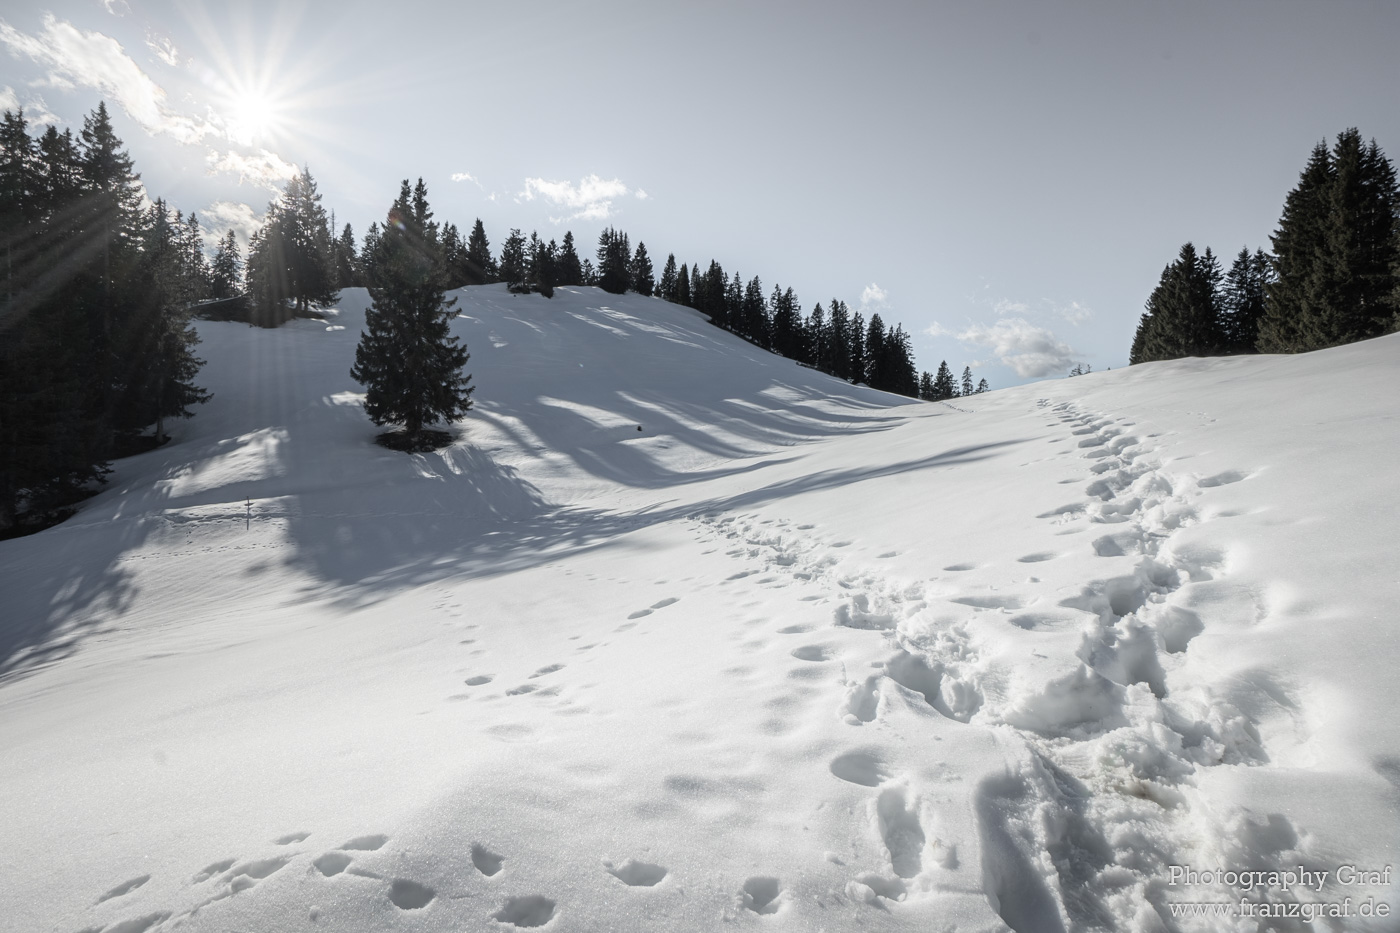 This image presents a tranquil winter scene that perfectly encapsulates the essence of the season. It's taken outdoors and showcases a beautiful, snow-covered hill. The hill is dotted with a group of trees, their branches stark against the bright whiteness of the surrounding snow. One tree in particular stands out, located in the middle of the frame. Numerous footprints are imprinted in the thick blanket of snow, hinting at the presence of unseen visitors. The crisp, freezing air is almost palpable, and the sky above is a clear, unbroken expanse. This image could very well be from a ski resort, with the sloping terrain ideal for winter sports. Despite the chilly weather, there's a certain warmth to the scene, perhaps from the sun shining subtly through the trees.